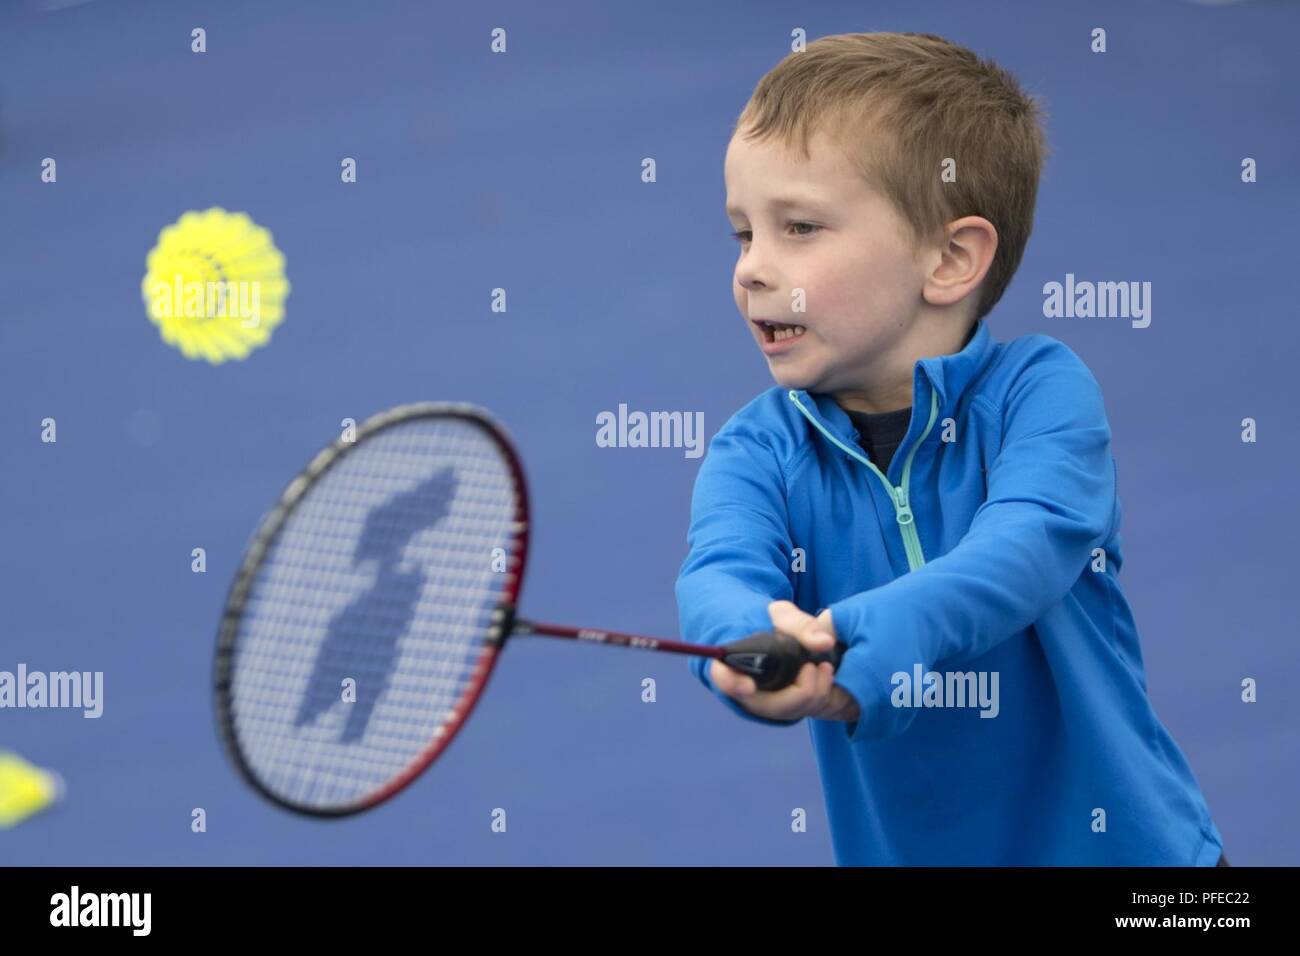 Jackson Brockhoff, 5, plays badminton during an exhibition day for families during the 2018 games at the Air Force Academy in Colorado Springs, Colo. June 3, 2018. Stock Photo